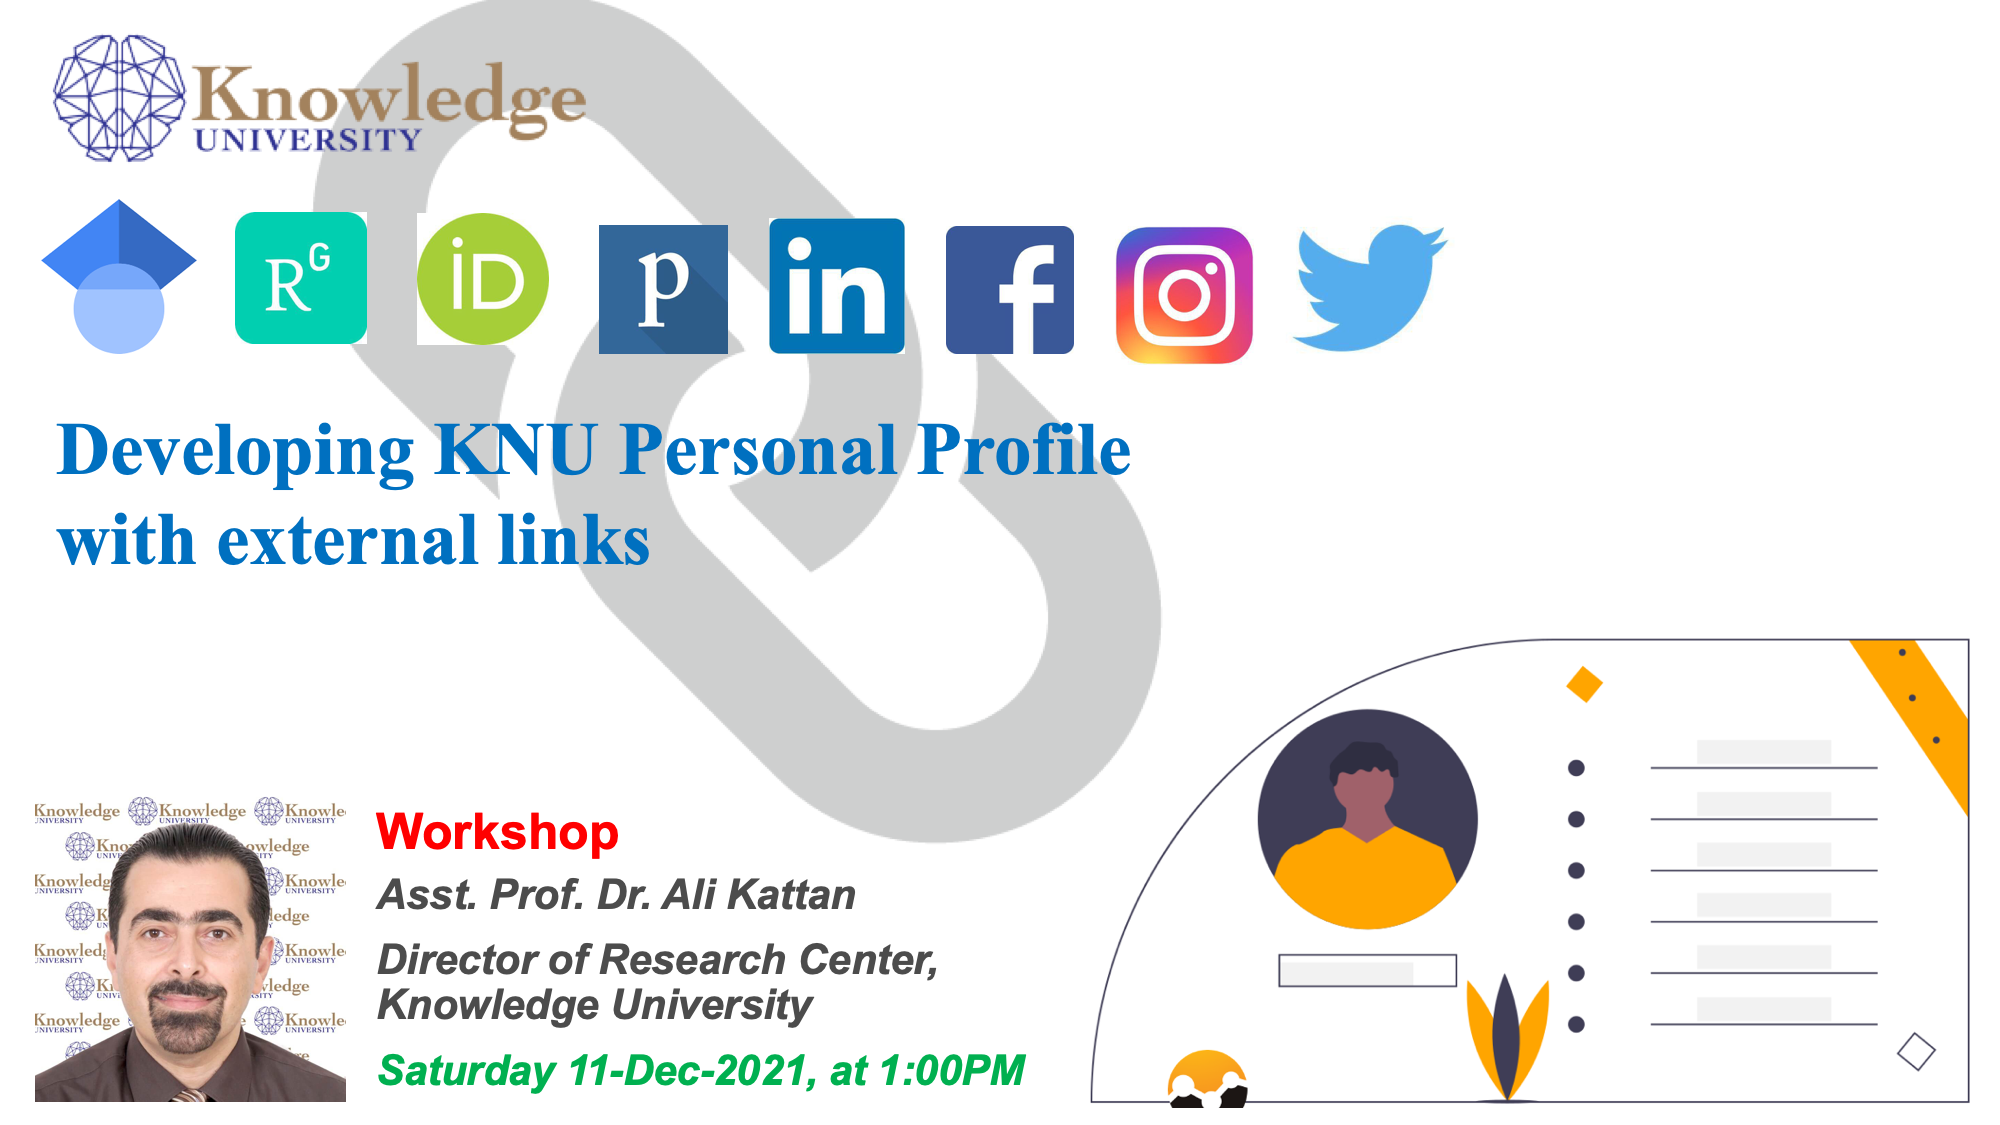 Developing KNU Personal Profile with external links